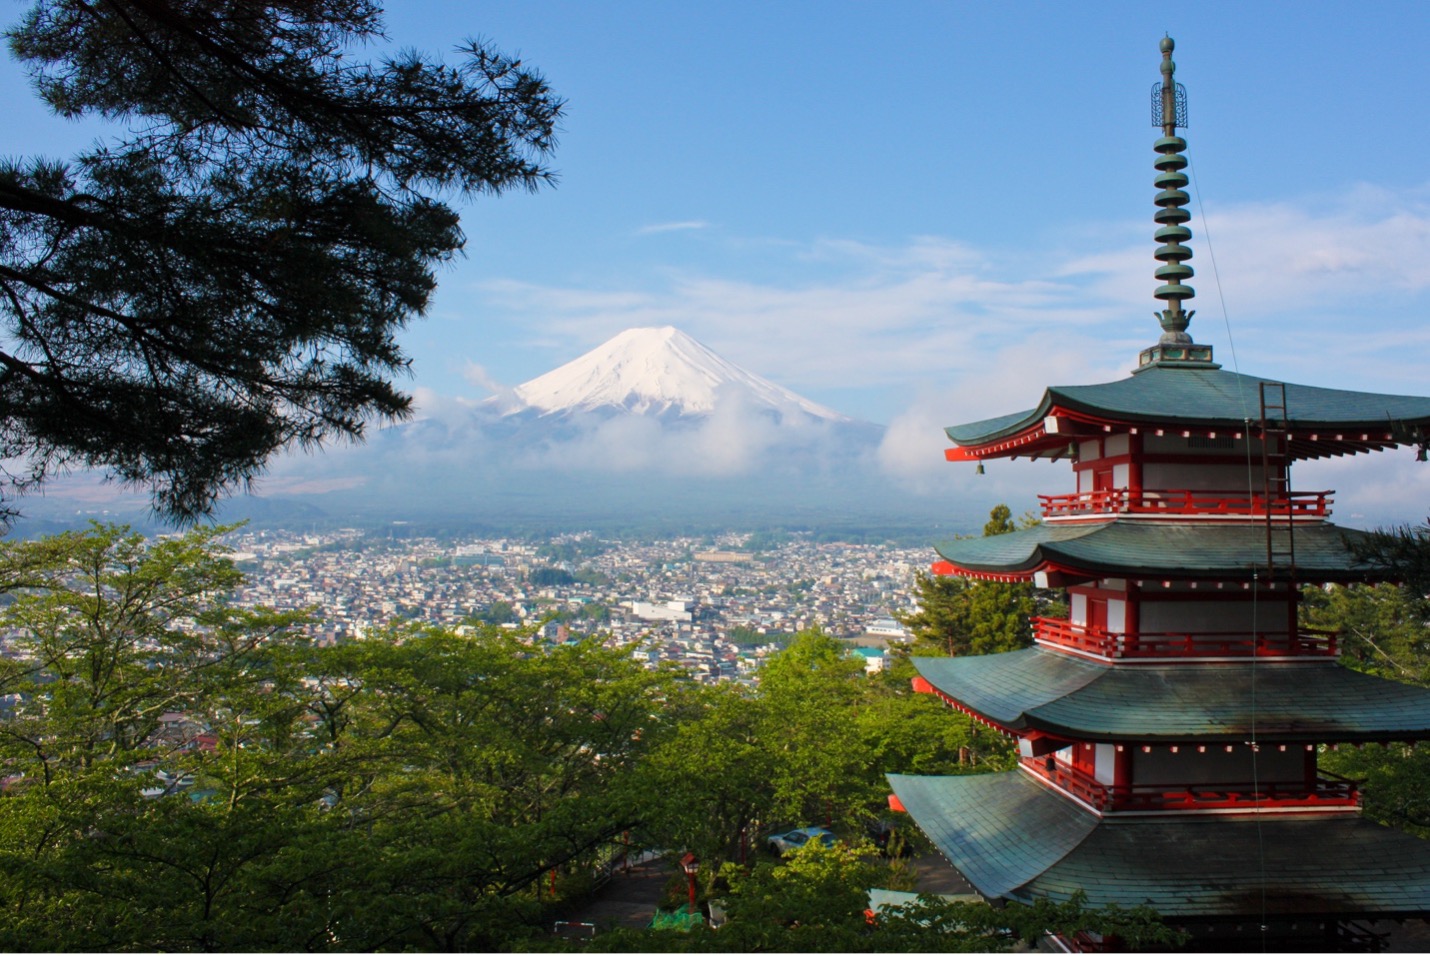 A view of Mt. Fuji with a pagoda in the foreground.